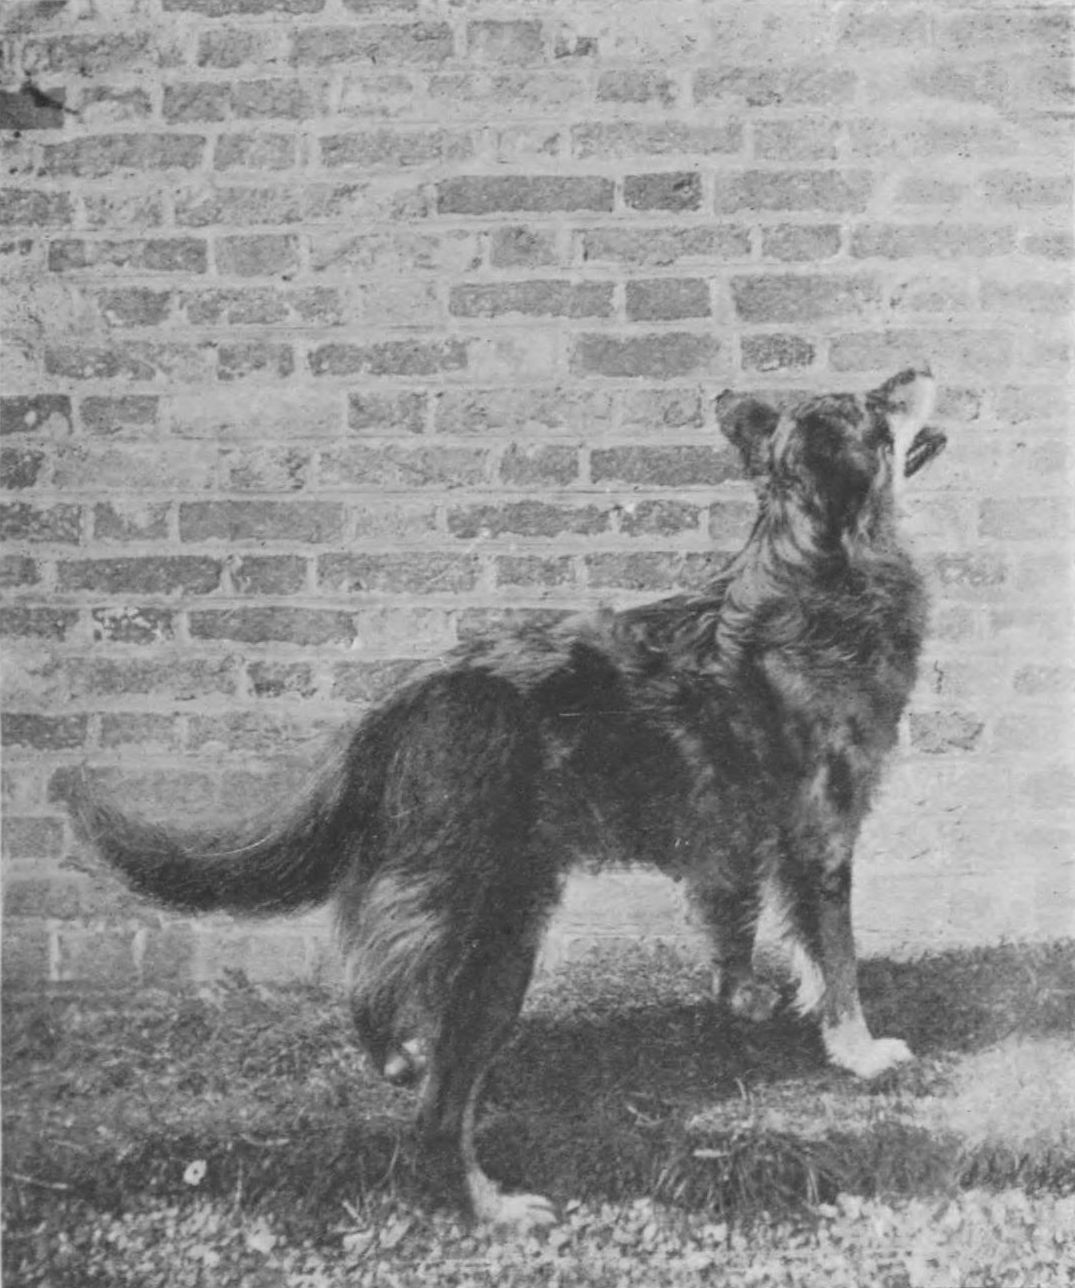 [Photograph of a dog]